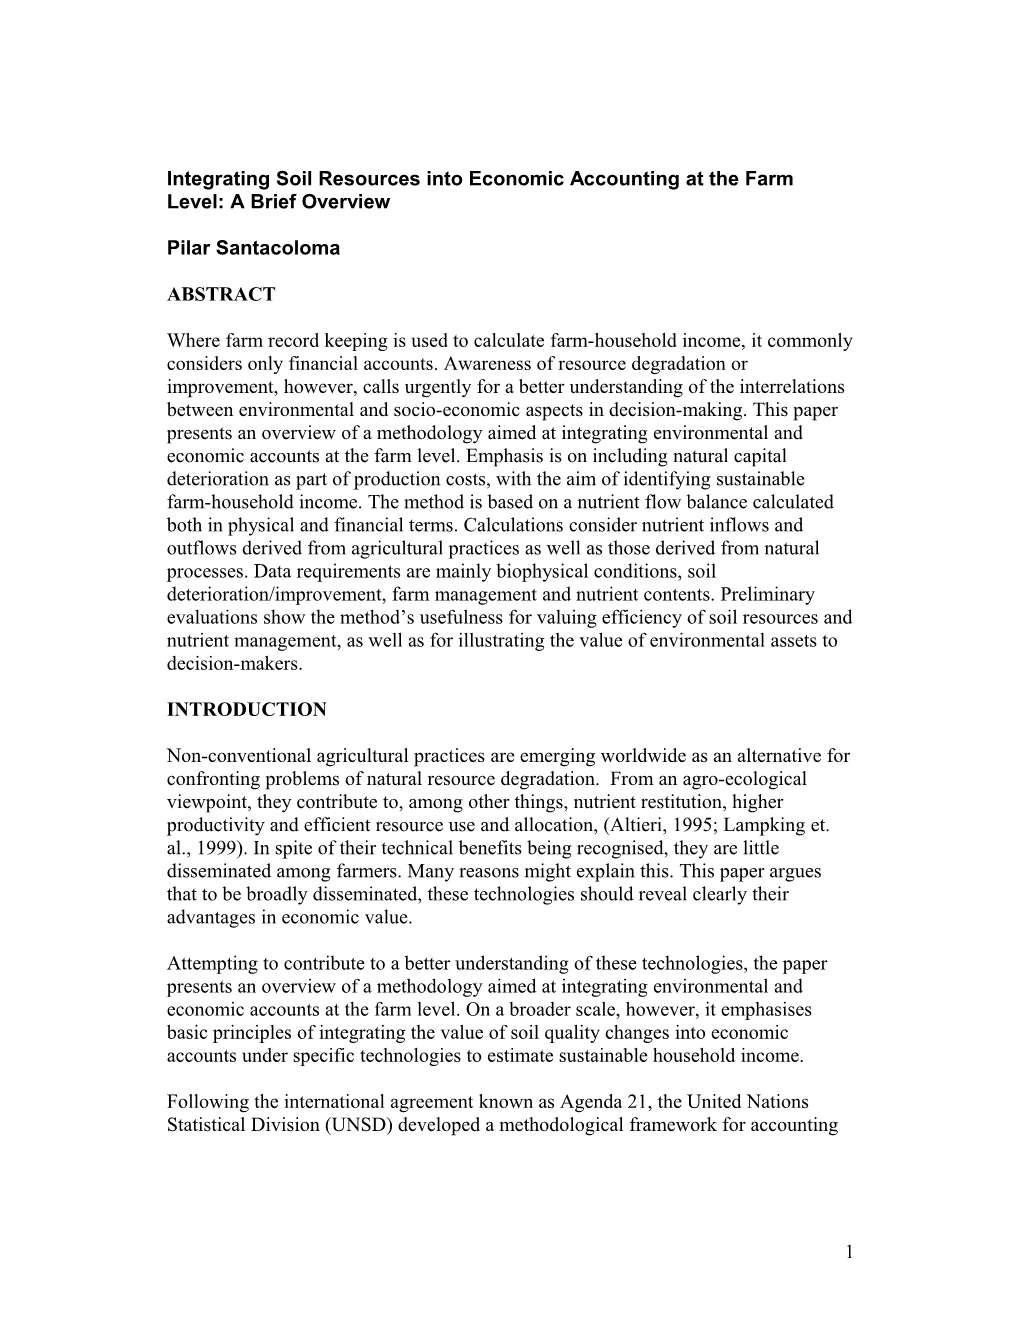 Integrating Soil Resources and Economic Accounting at the Farm Level: a Brief Overview